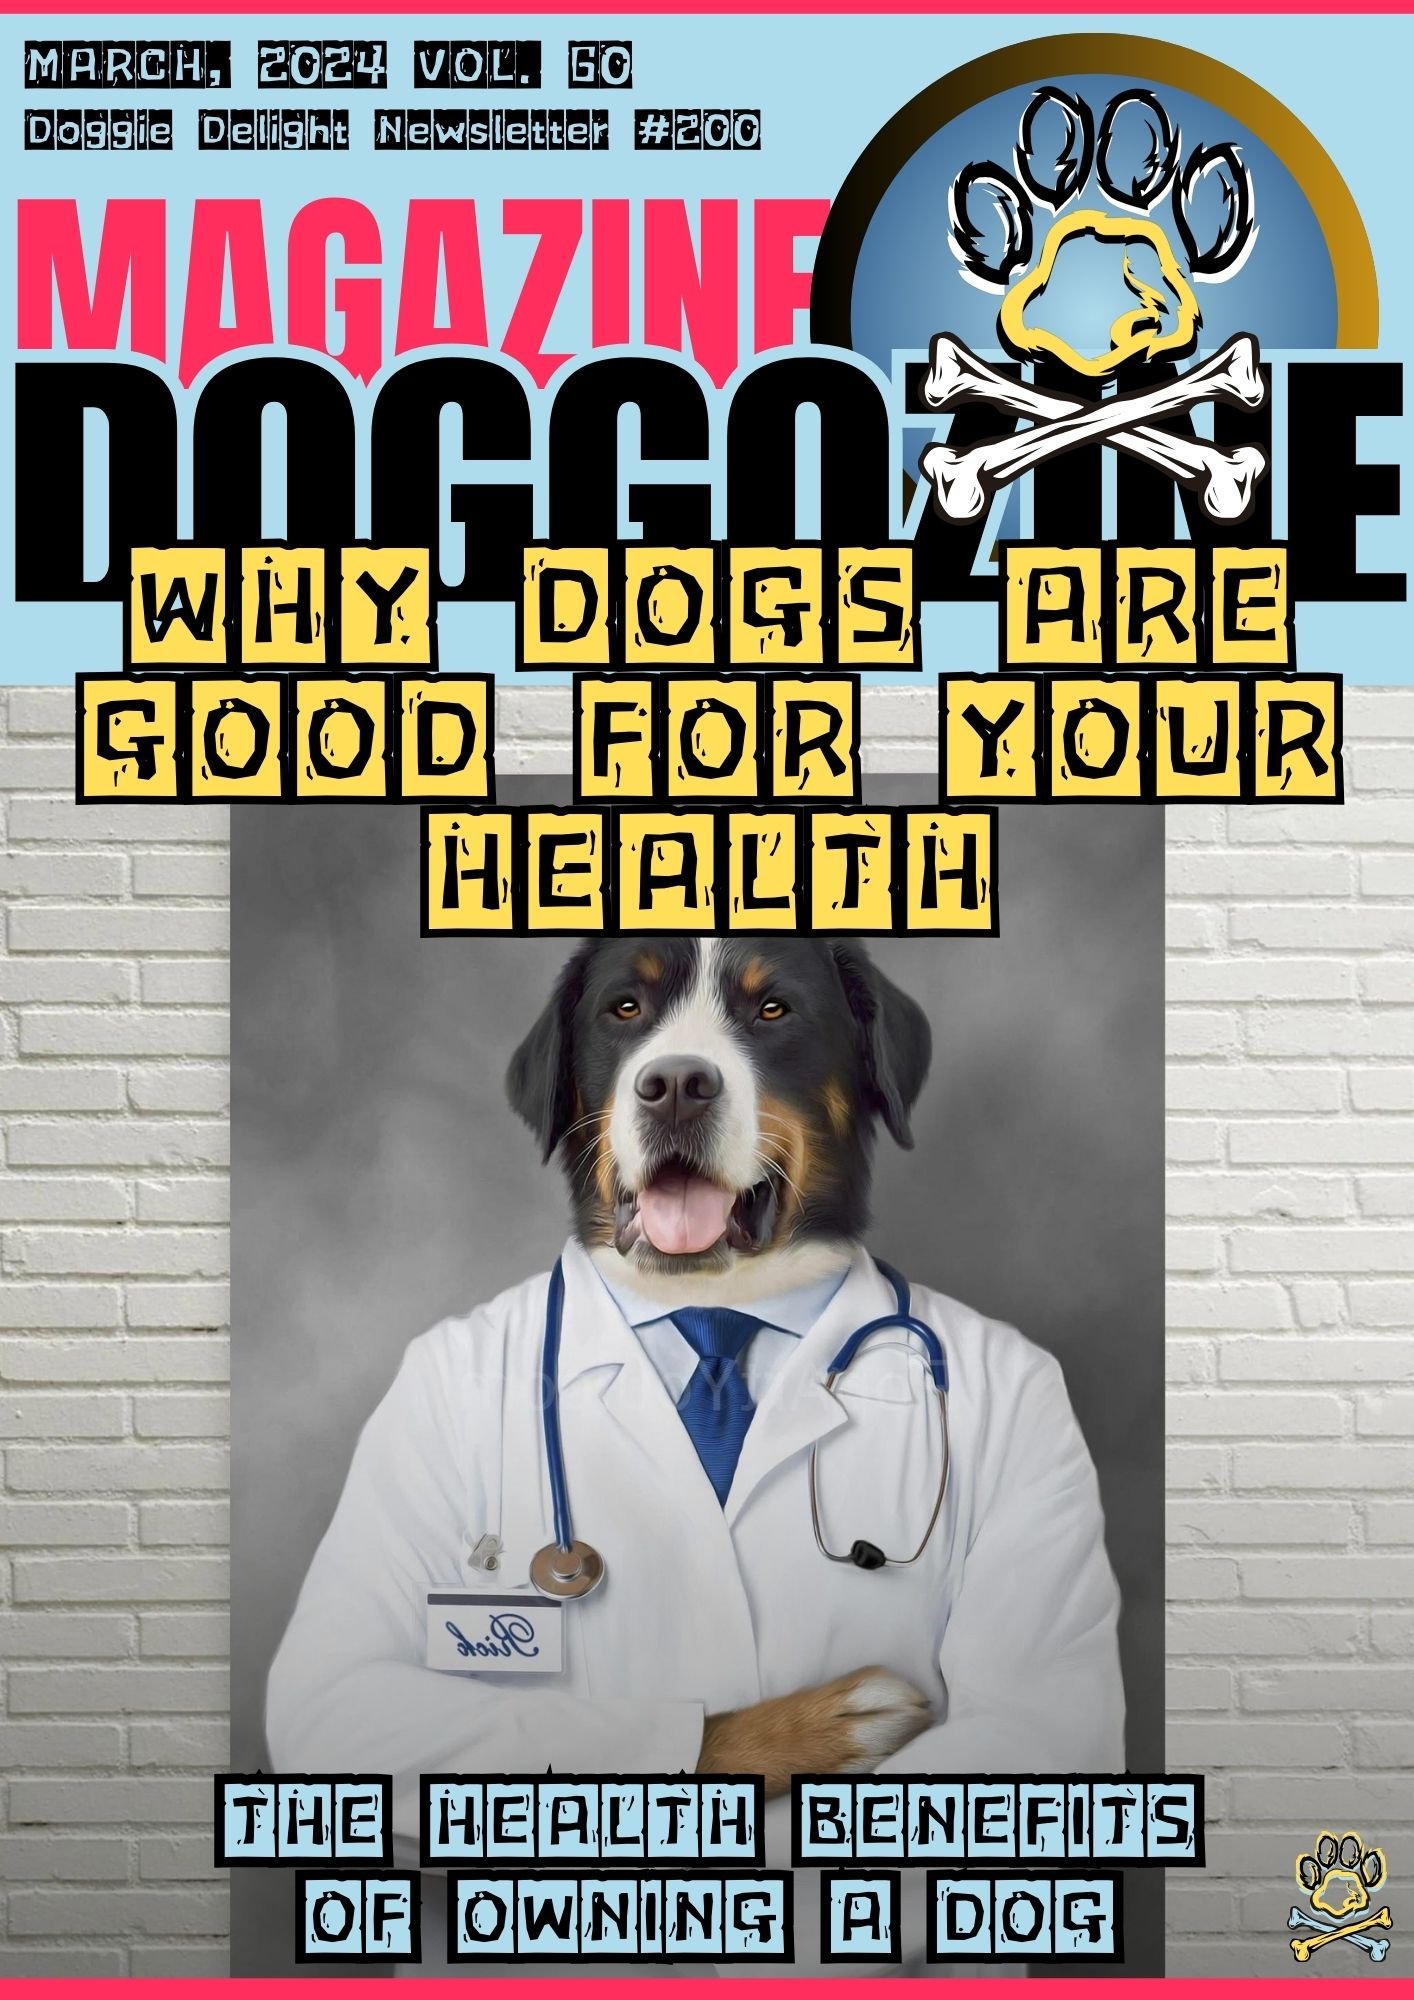 WHY DOGS ARE GOOD FOR YOUR HEALTH